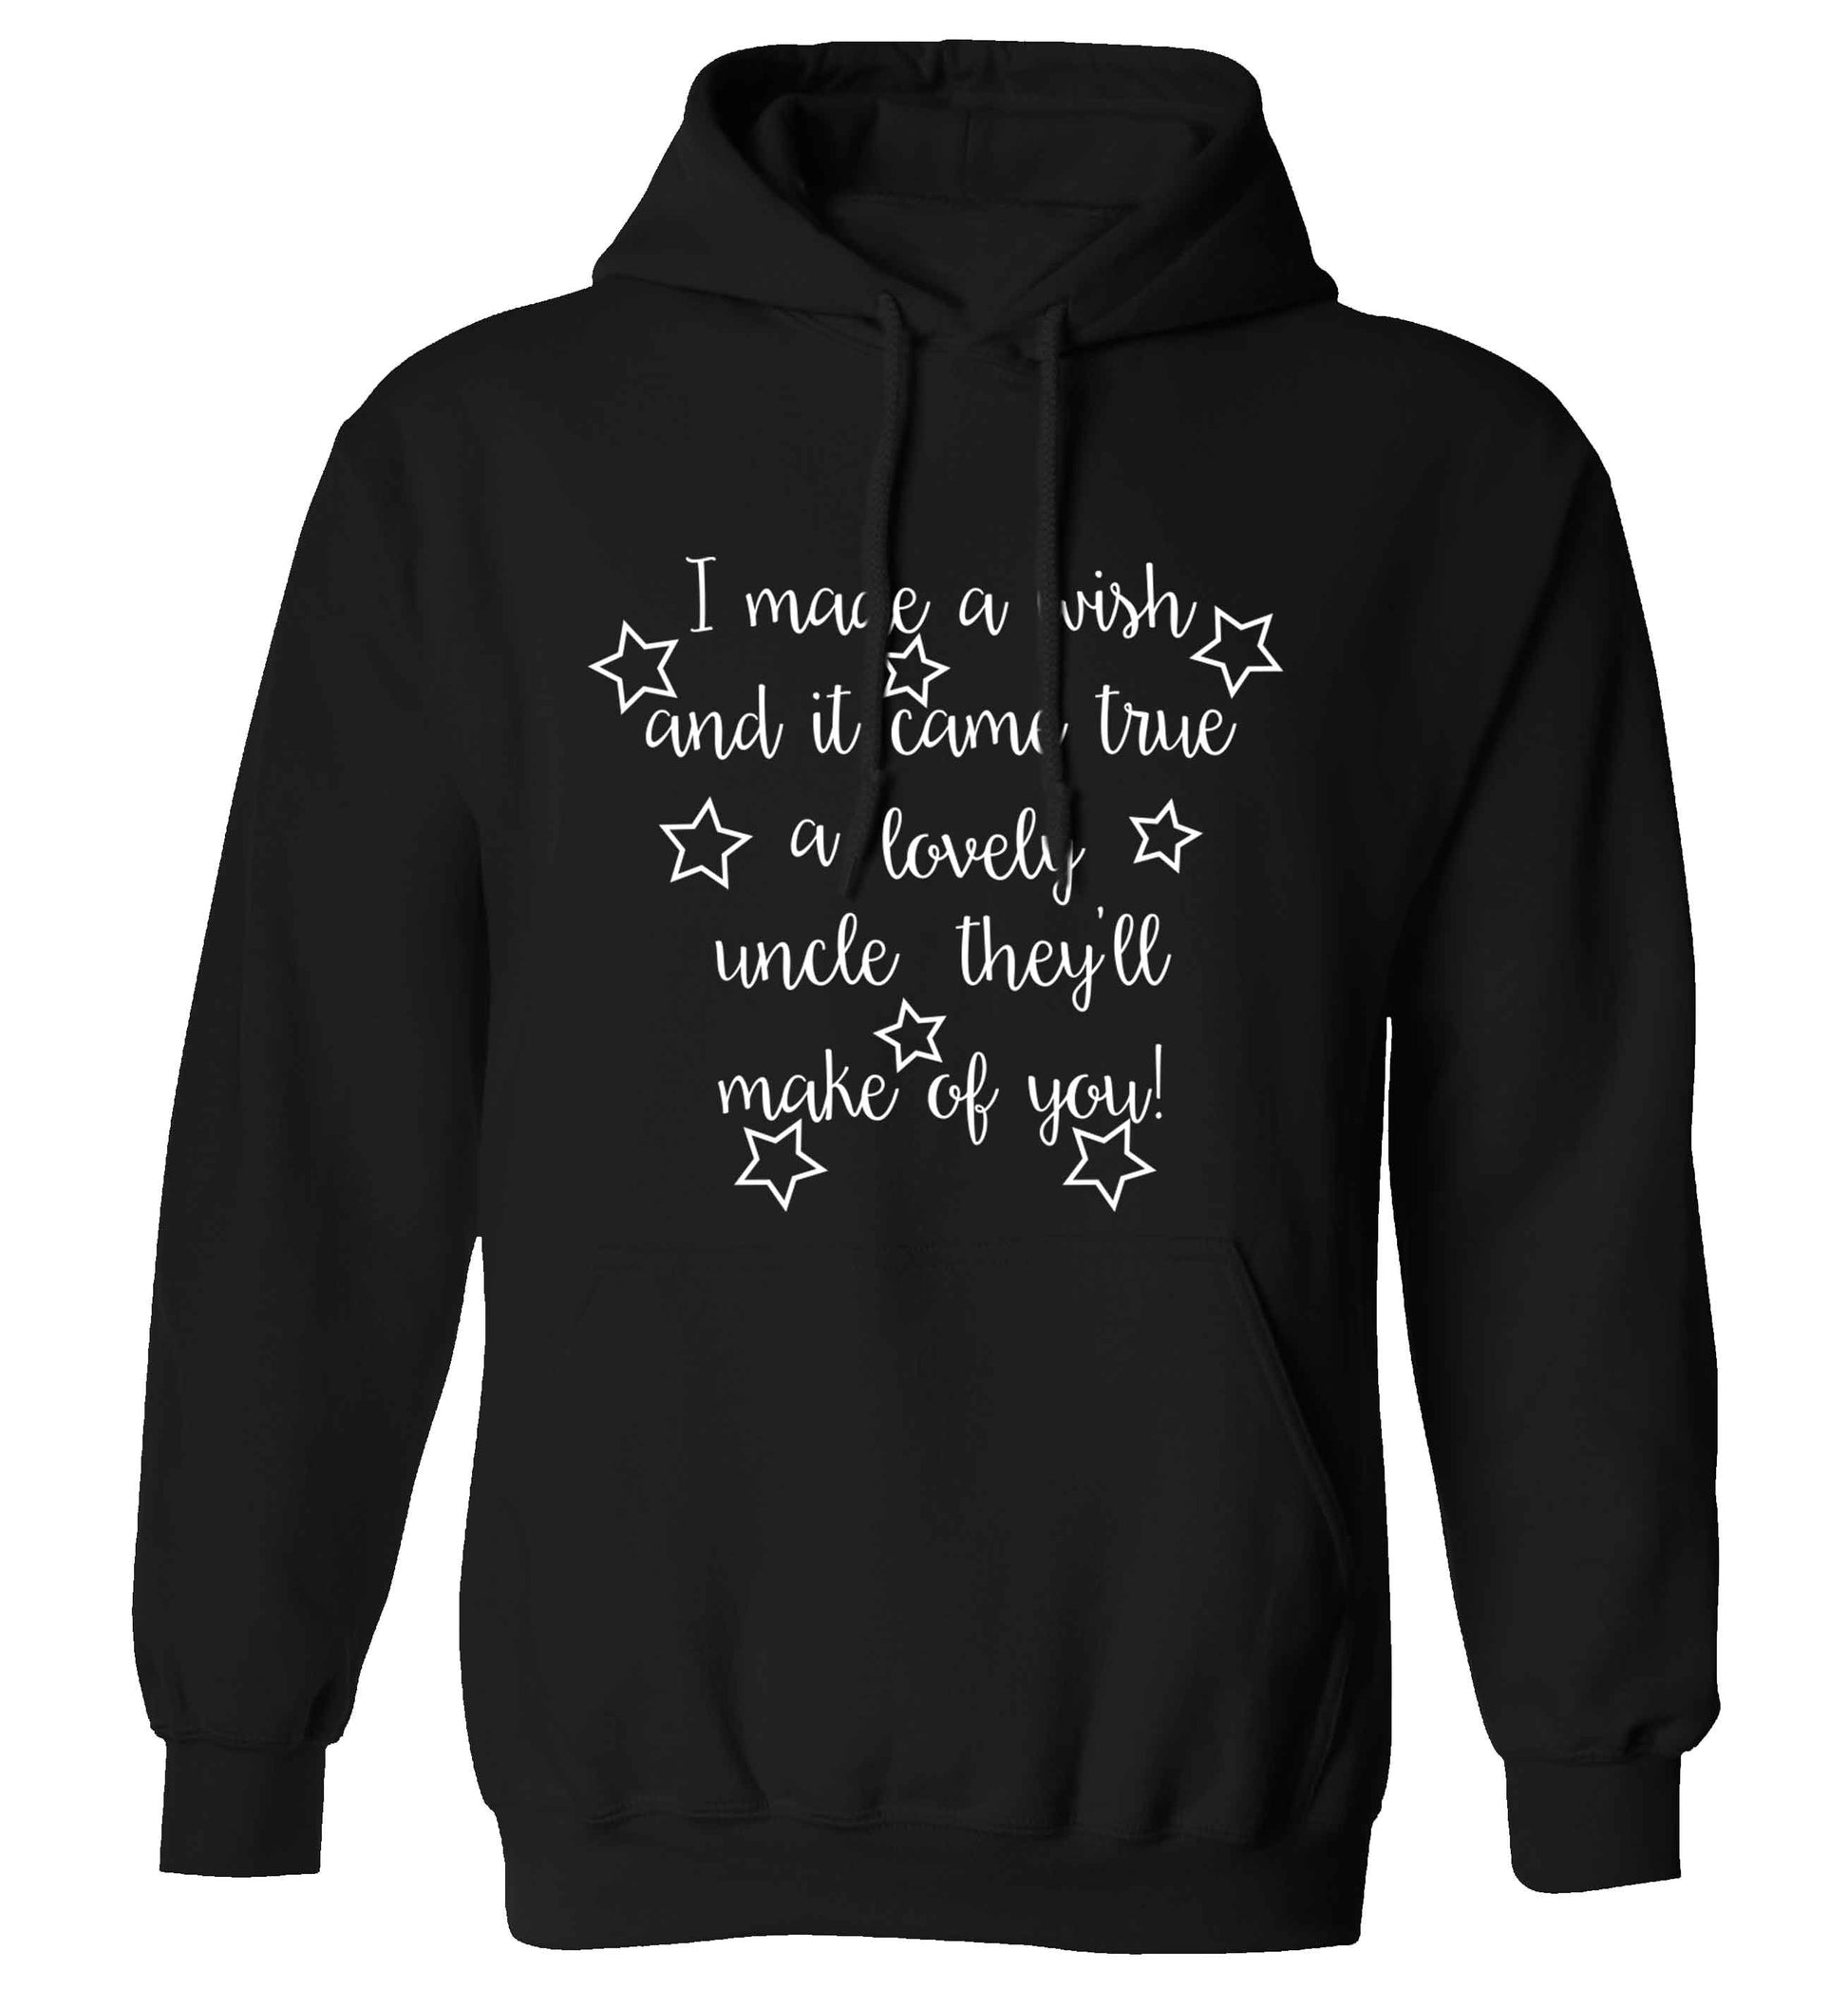 I made a wish and it came true a lovely uncle they'll make of you! adults unisex black hoodie 2XL